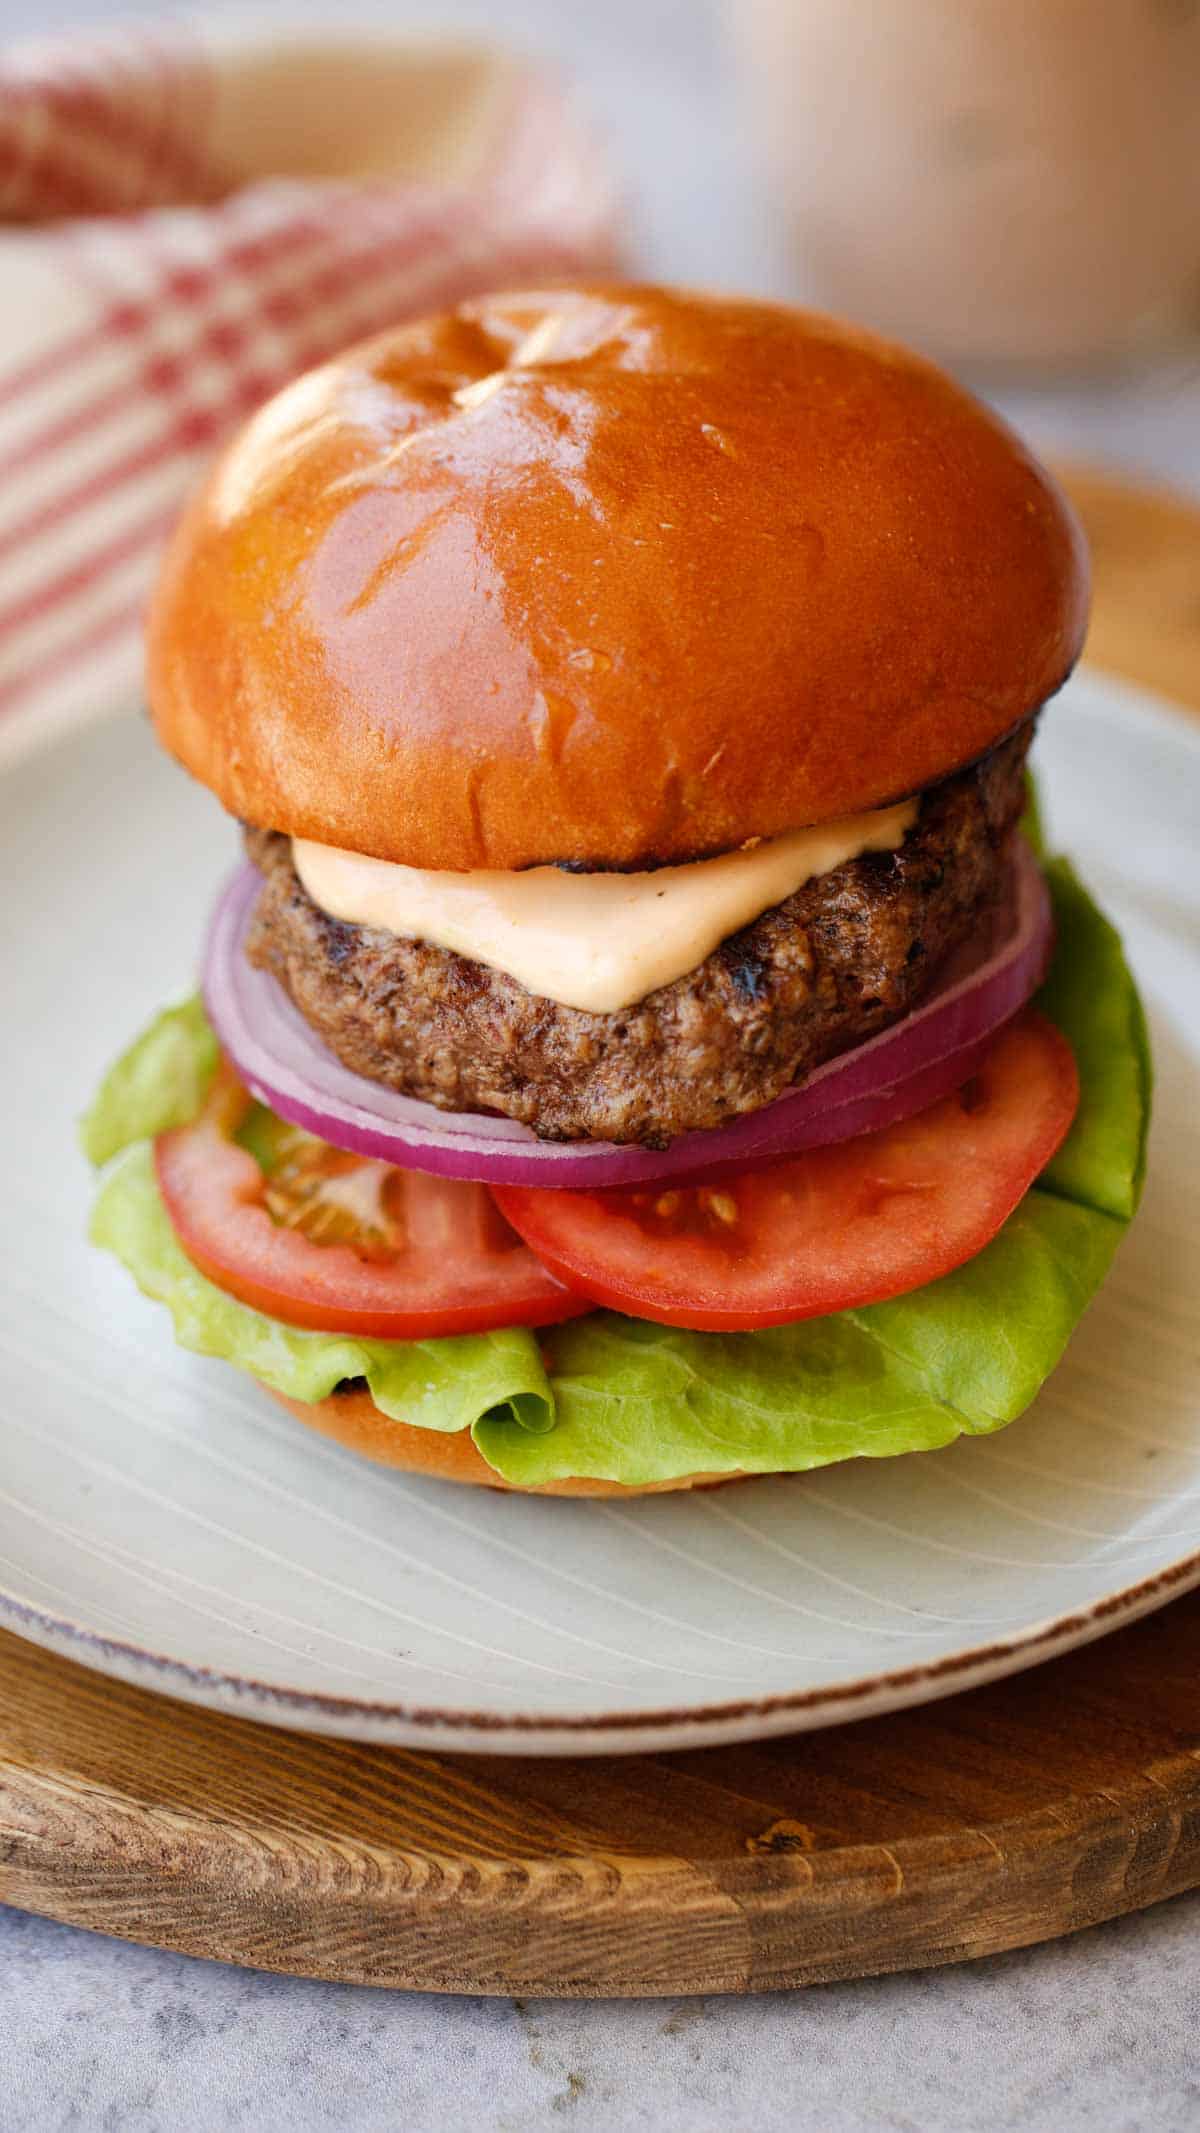 A burger on a plate loaded with lettuce tomato onion and burger sauce